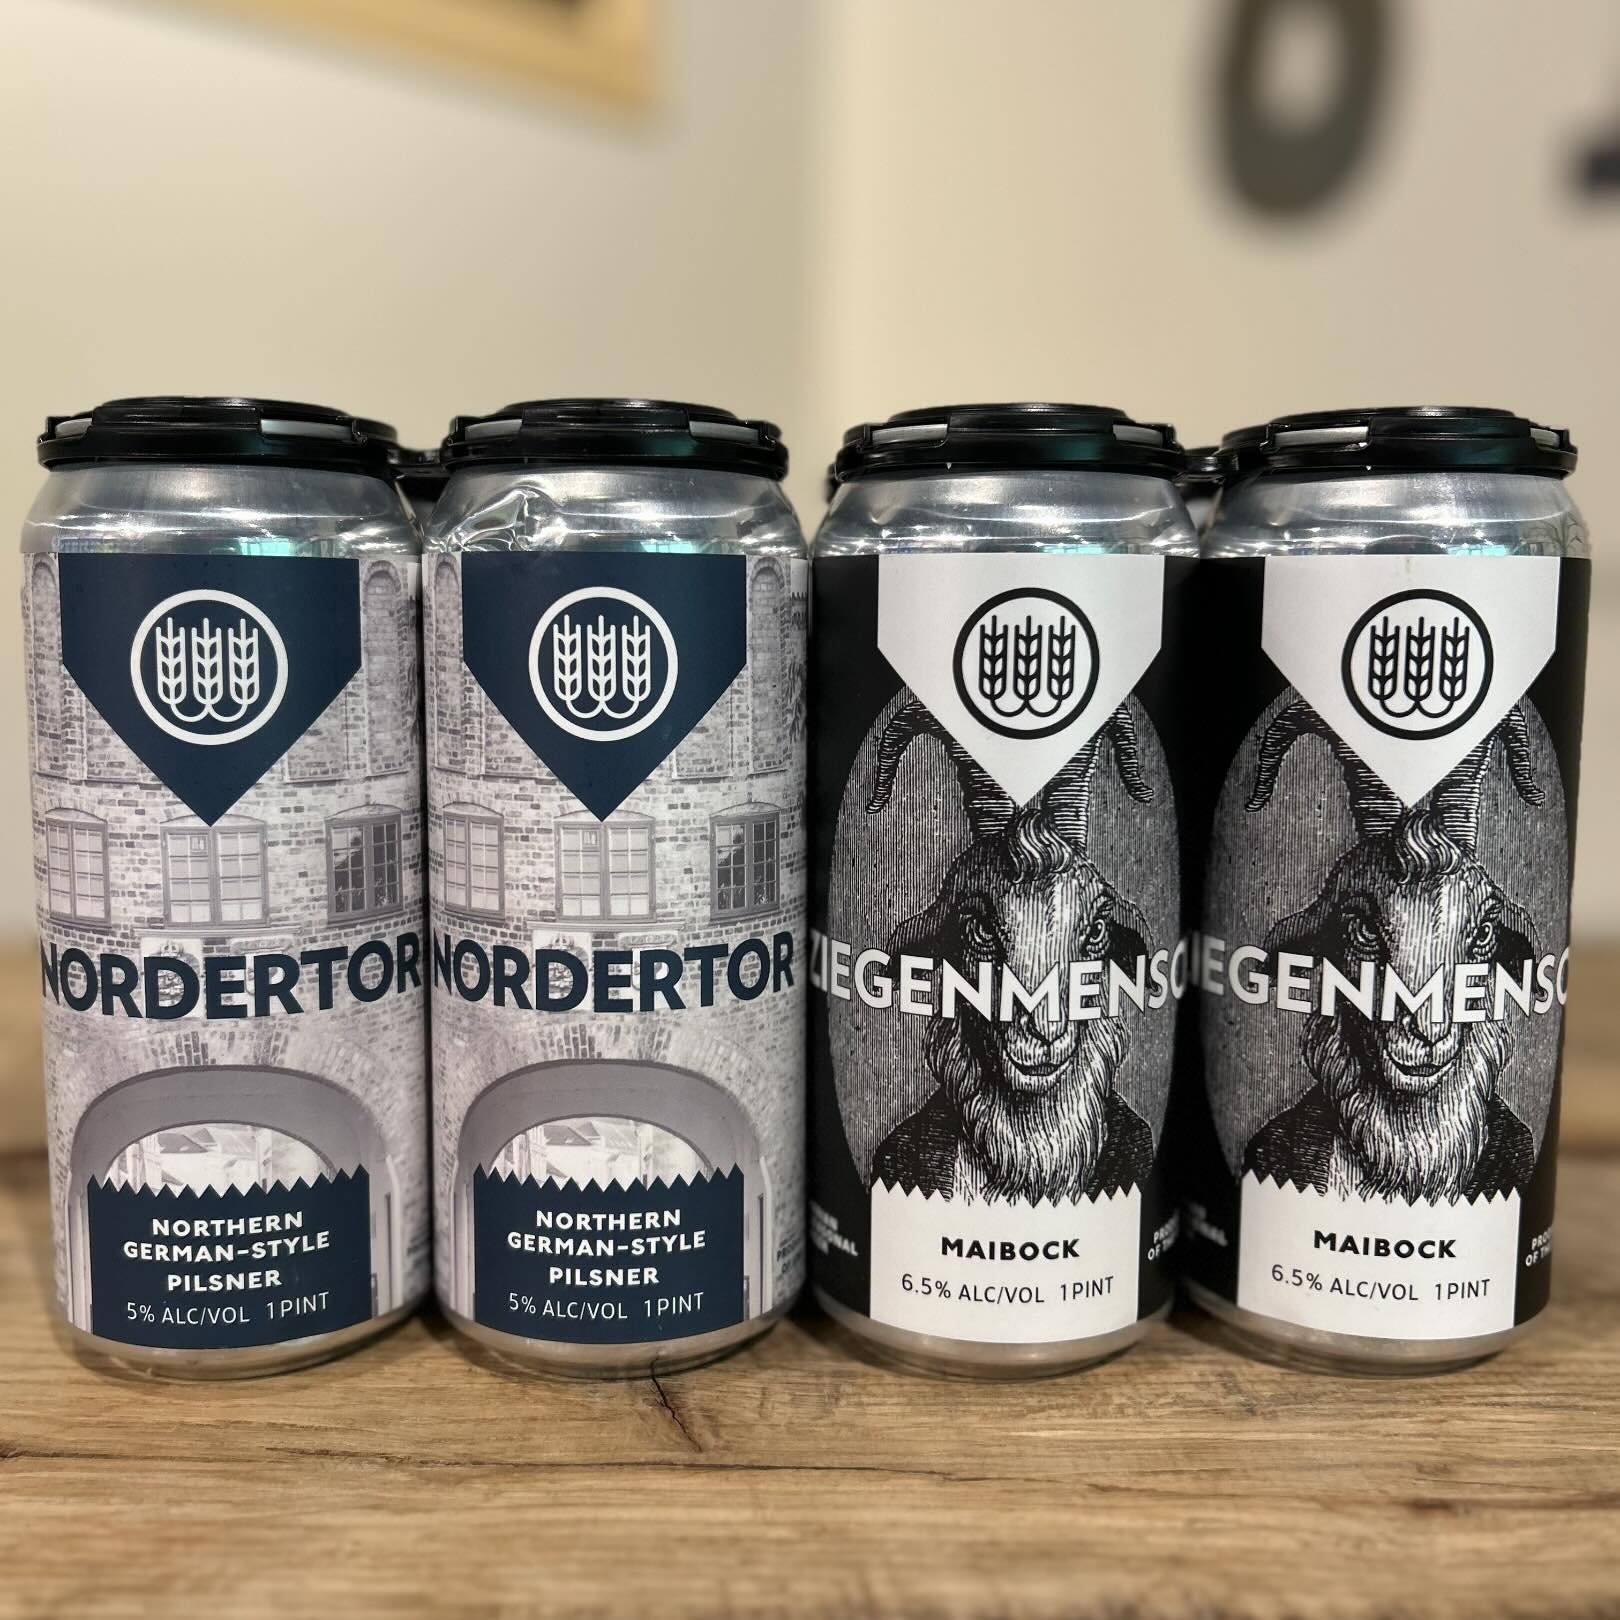 Fresh @schillingbeerco #NowAvailable #SudburyCraftBeer #DrinkLager
&mdash;
Nordertor, our Northern German-Style Pilsner. Floral and citrusy, this highly aromatic, crystalline pilsner is hopped with all German Saaz &amp; Magnum hops, for a piquantly b